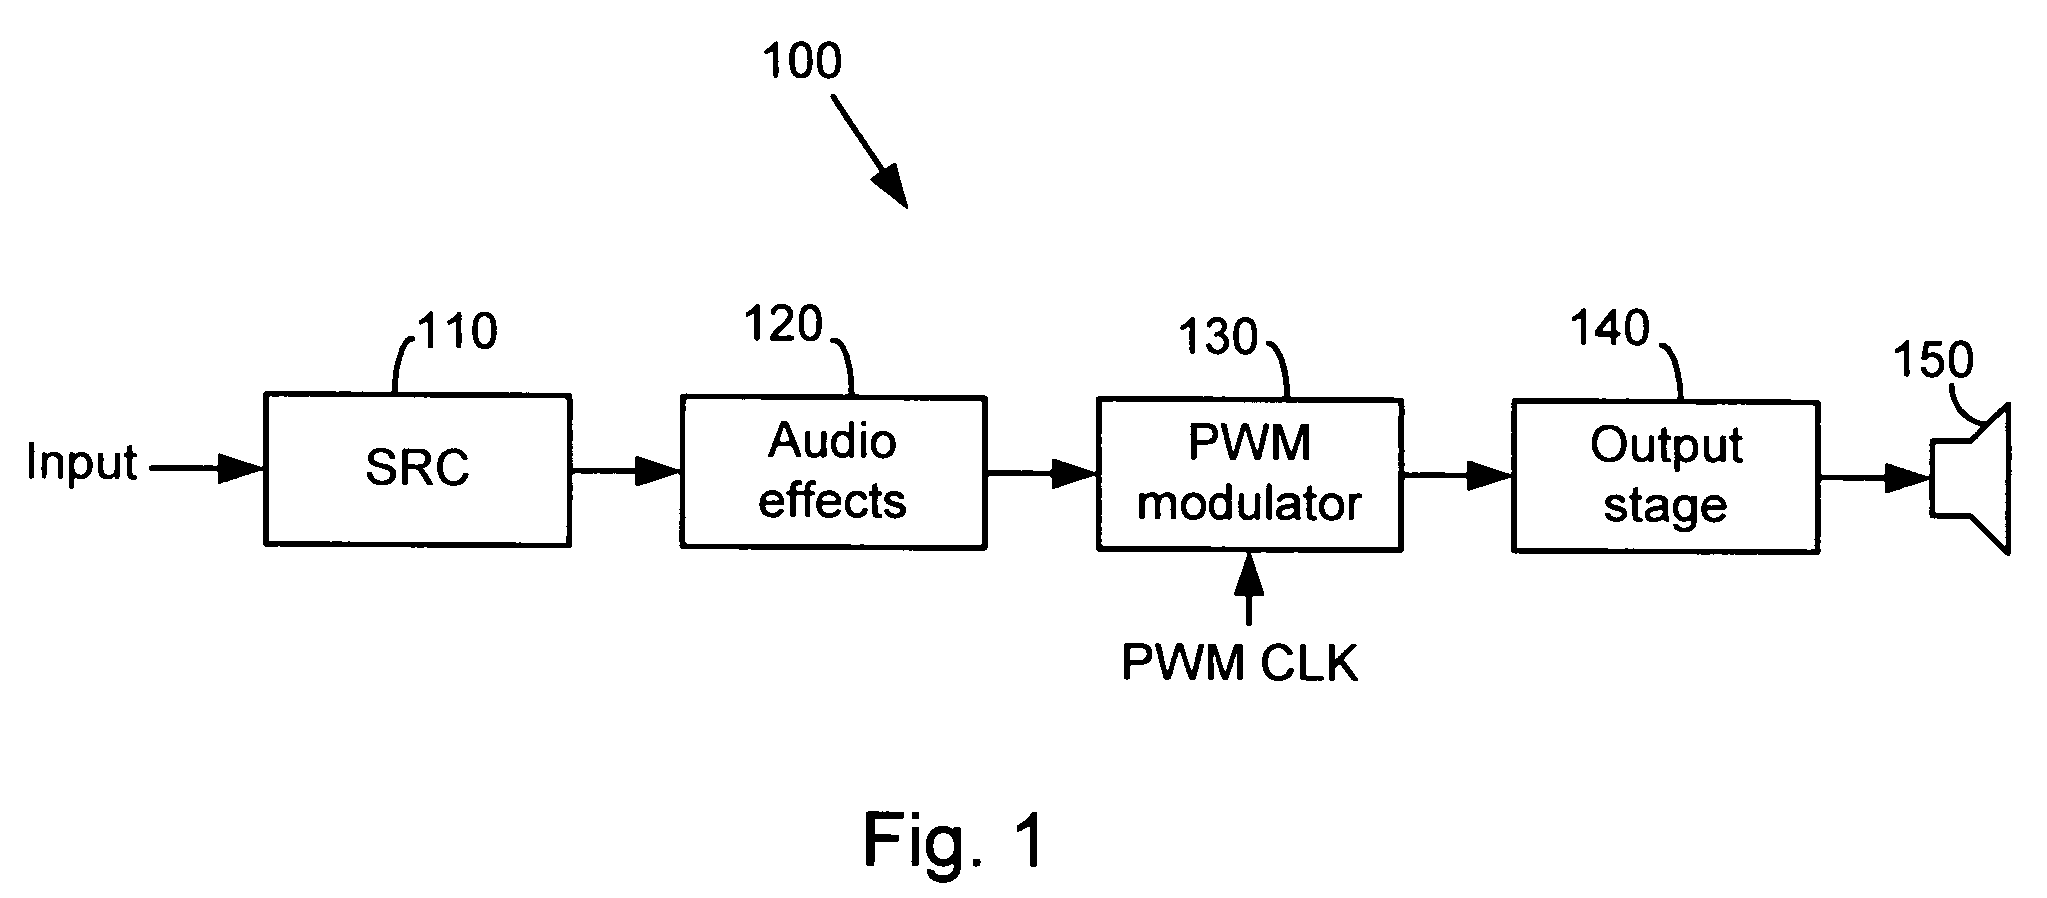 Systems and methods for implementing a sample rate converter using hardware and software to maximize speed and flexibility